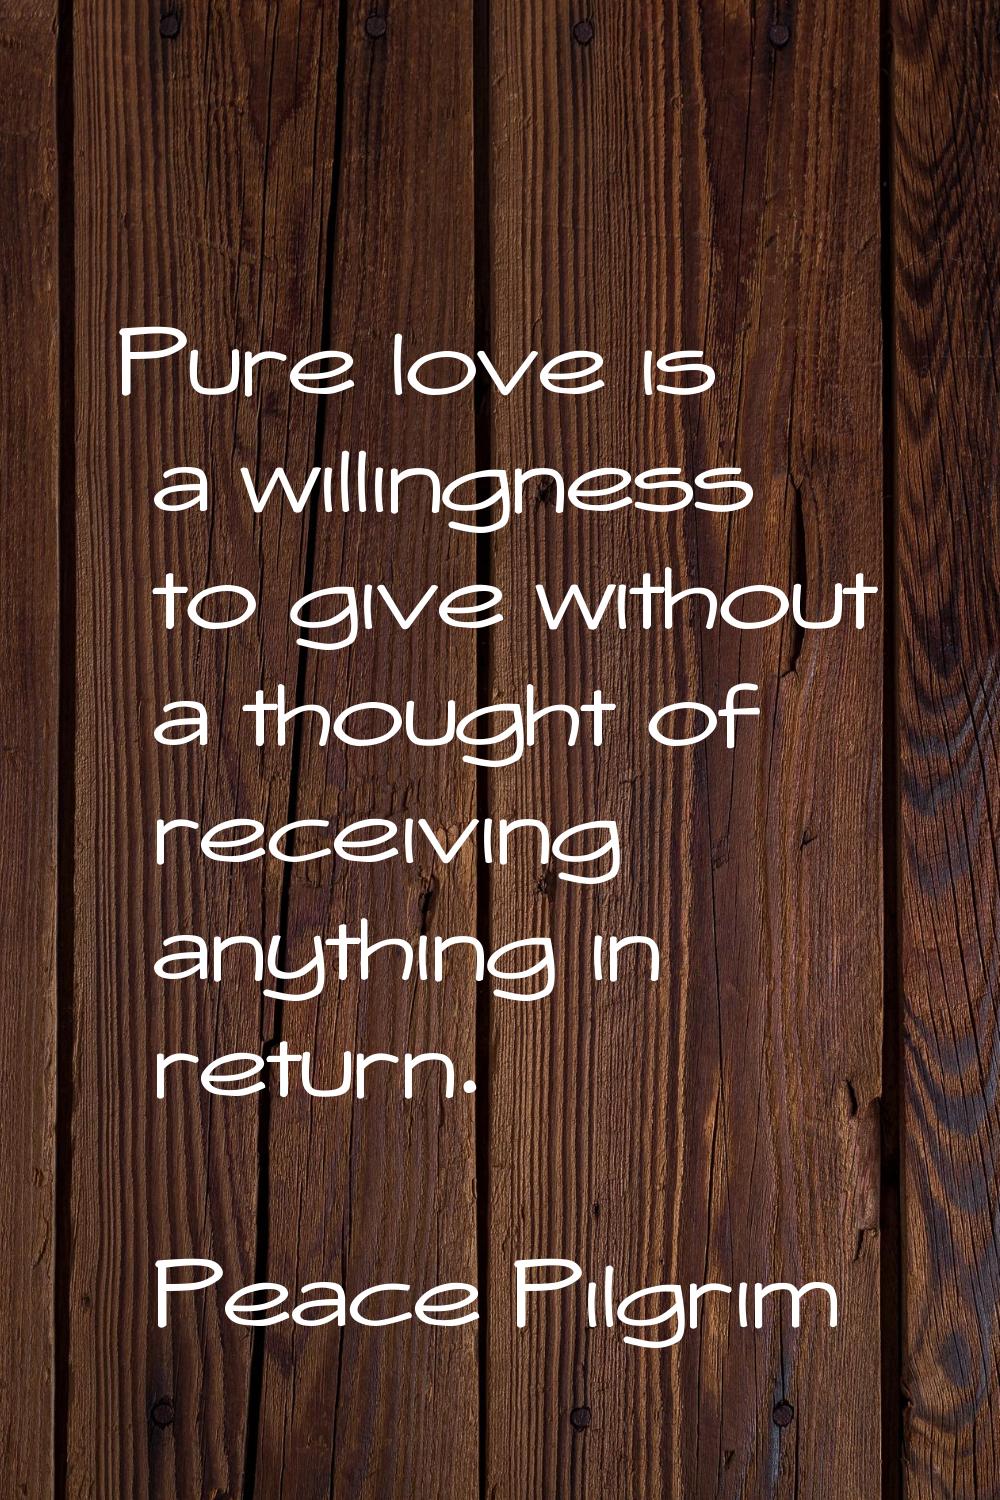 Pure love is a willingness to give without a thought of receiving anything in return.